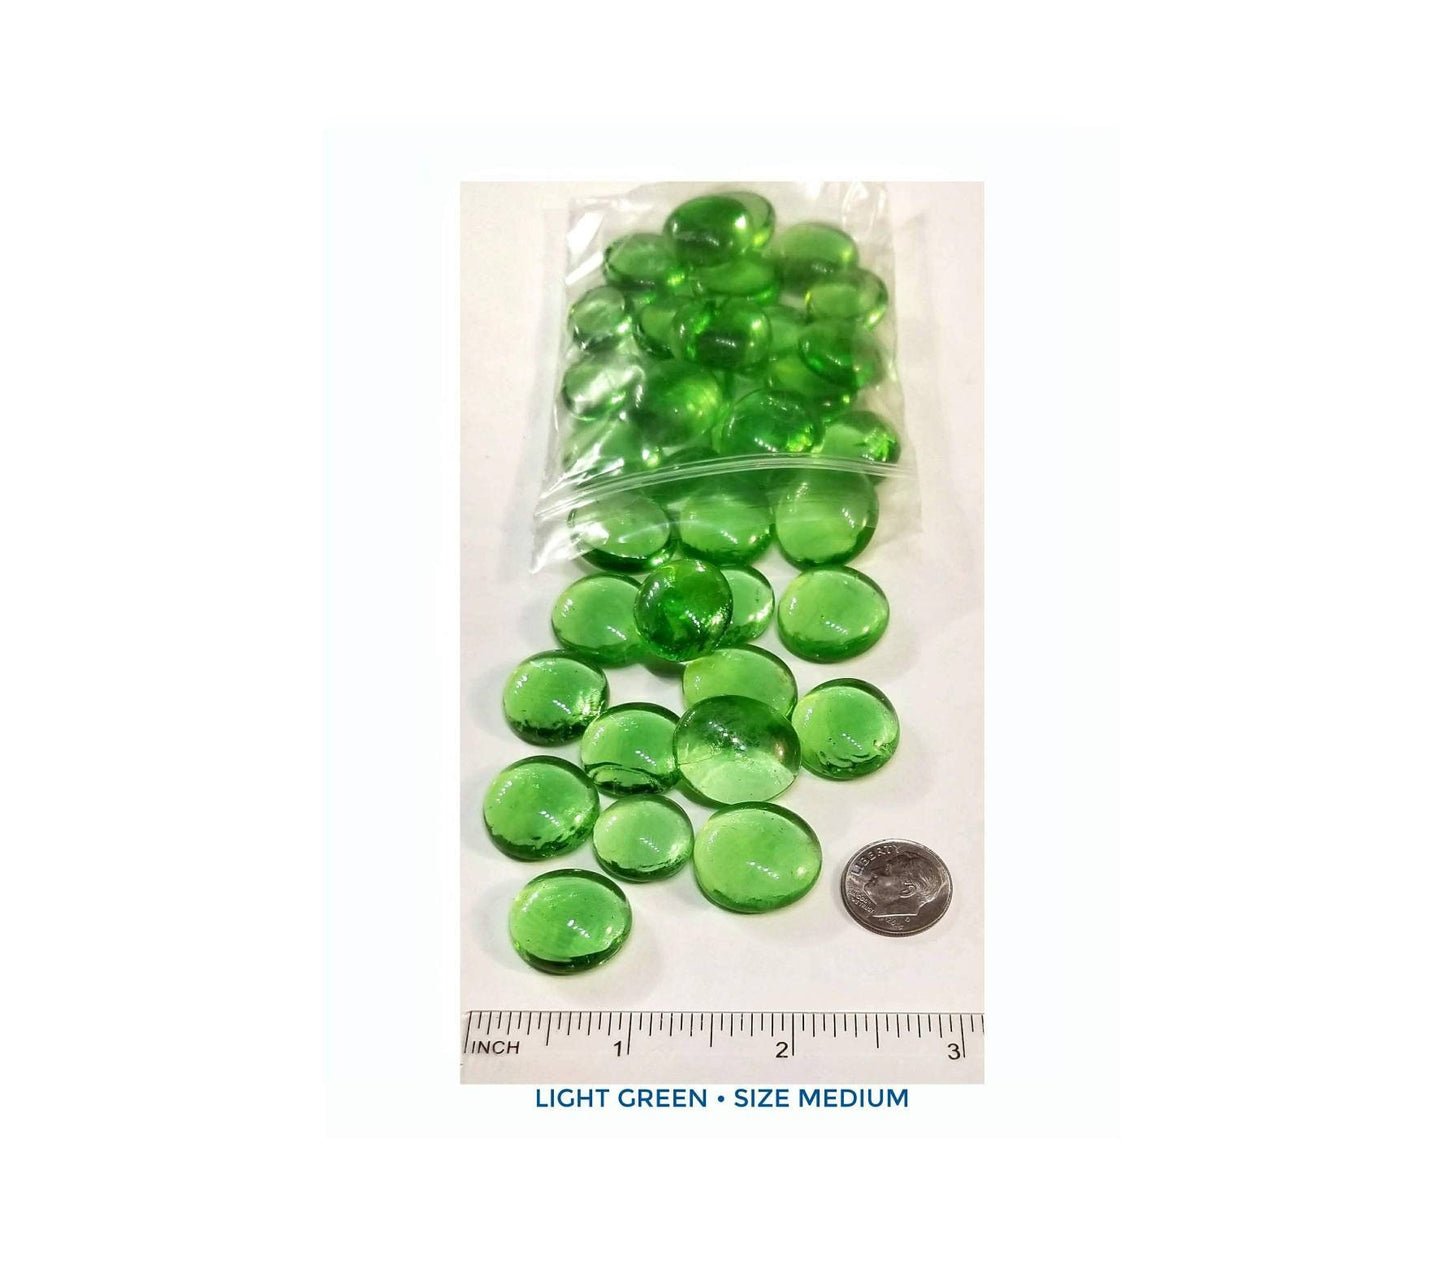 Green Glass Nuggets for Stained Glass. Steppingstones, Jewelry Making Supply, Teen Craft Projects. Vintage Medium sized Gems as pictured.